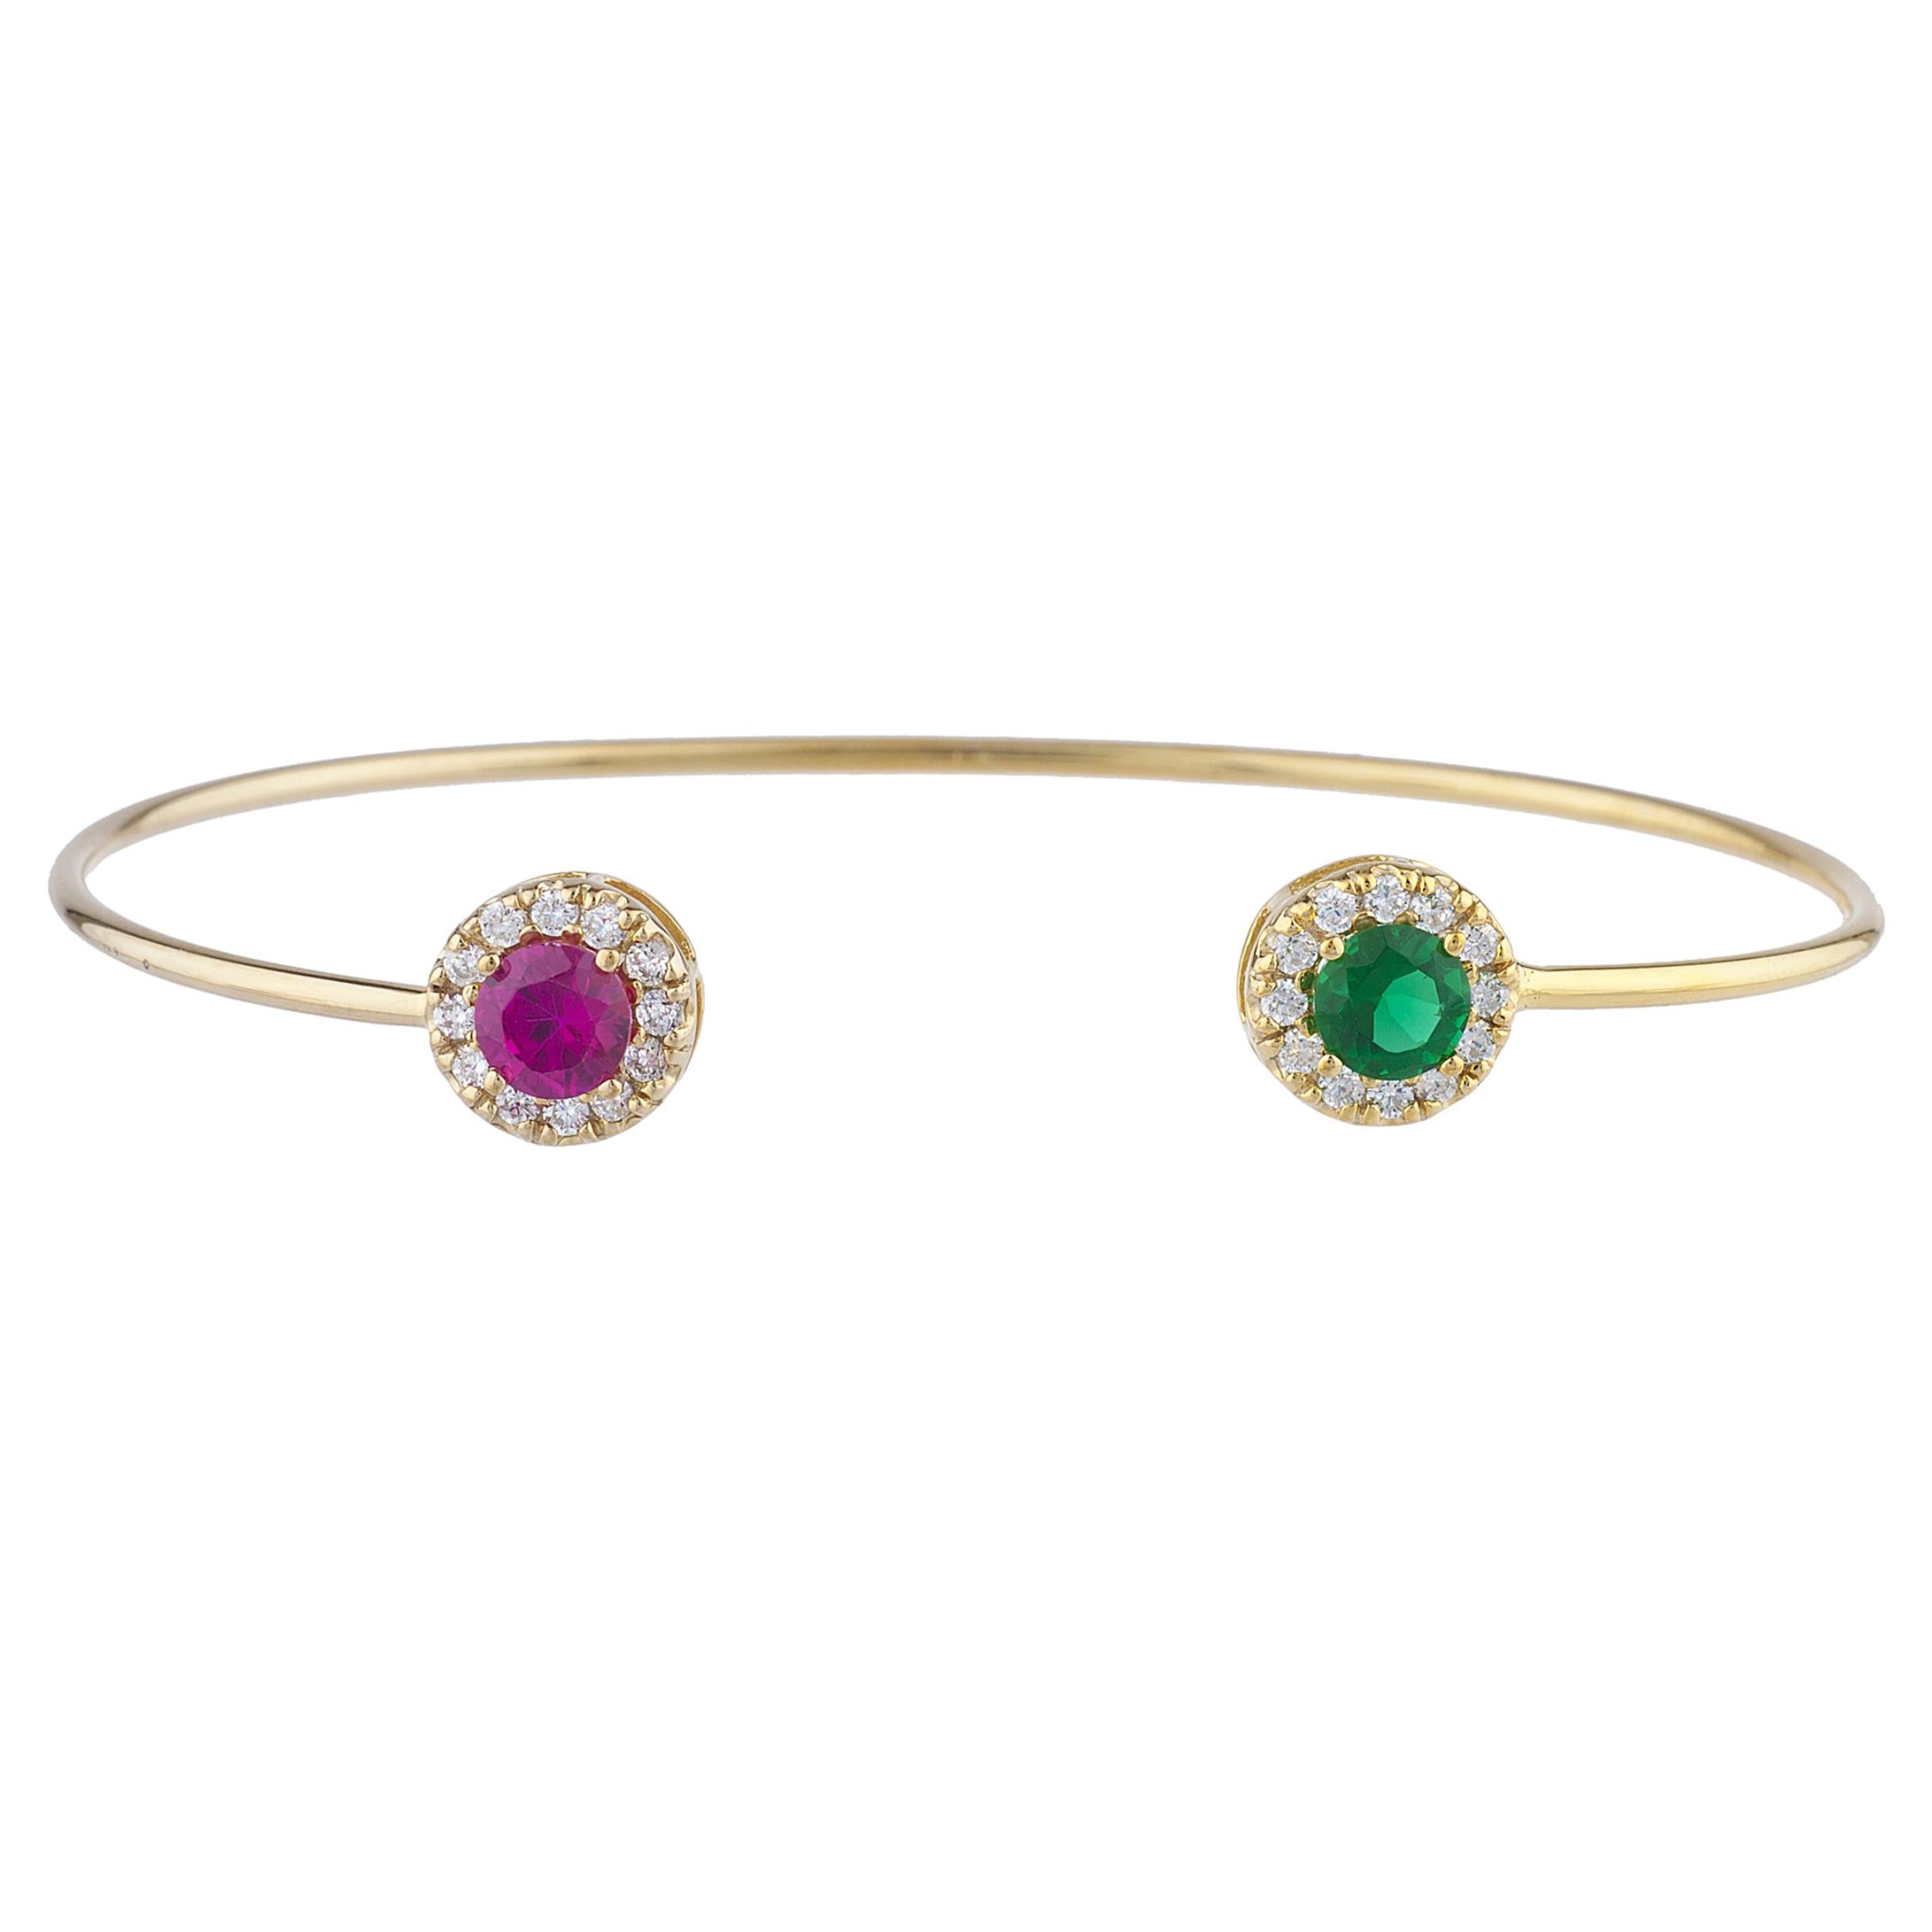 1 Ct Created Ruby & Emerald Halo Design Round Bangle Bracelet 14Kt Yellow Gold Rose Gold Silver